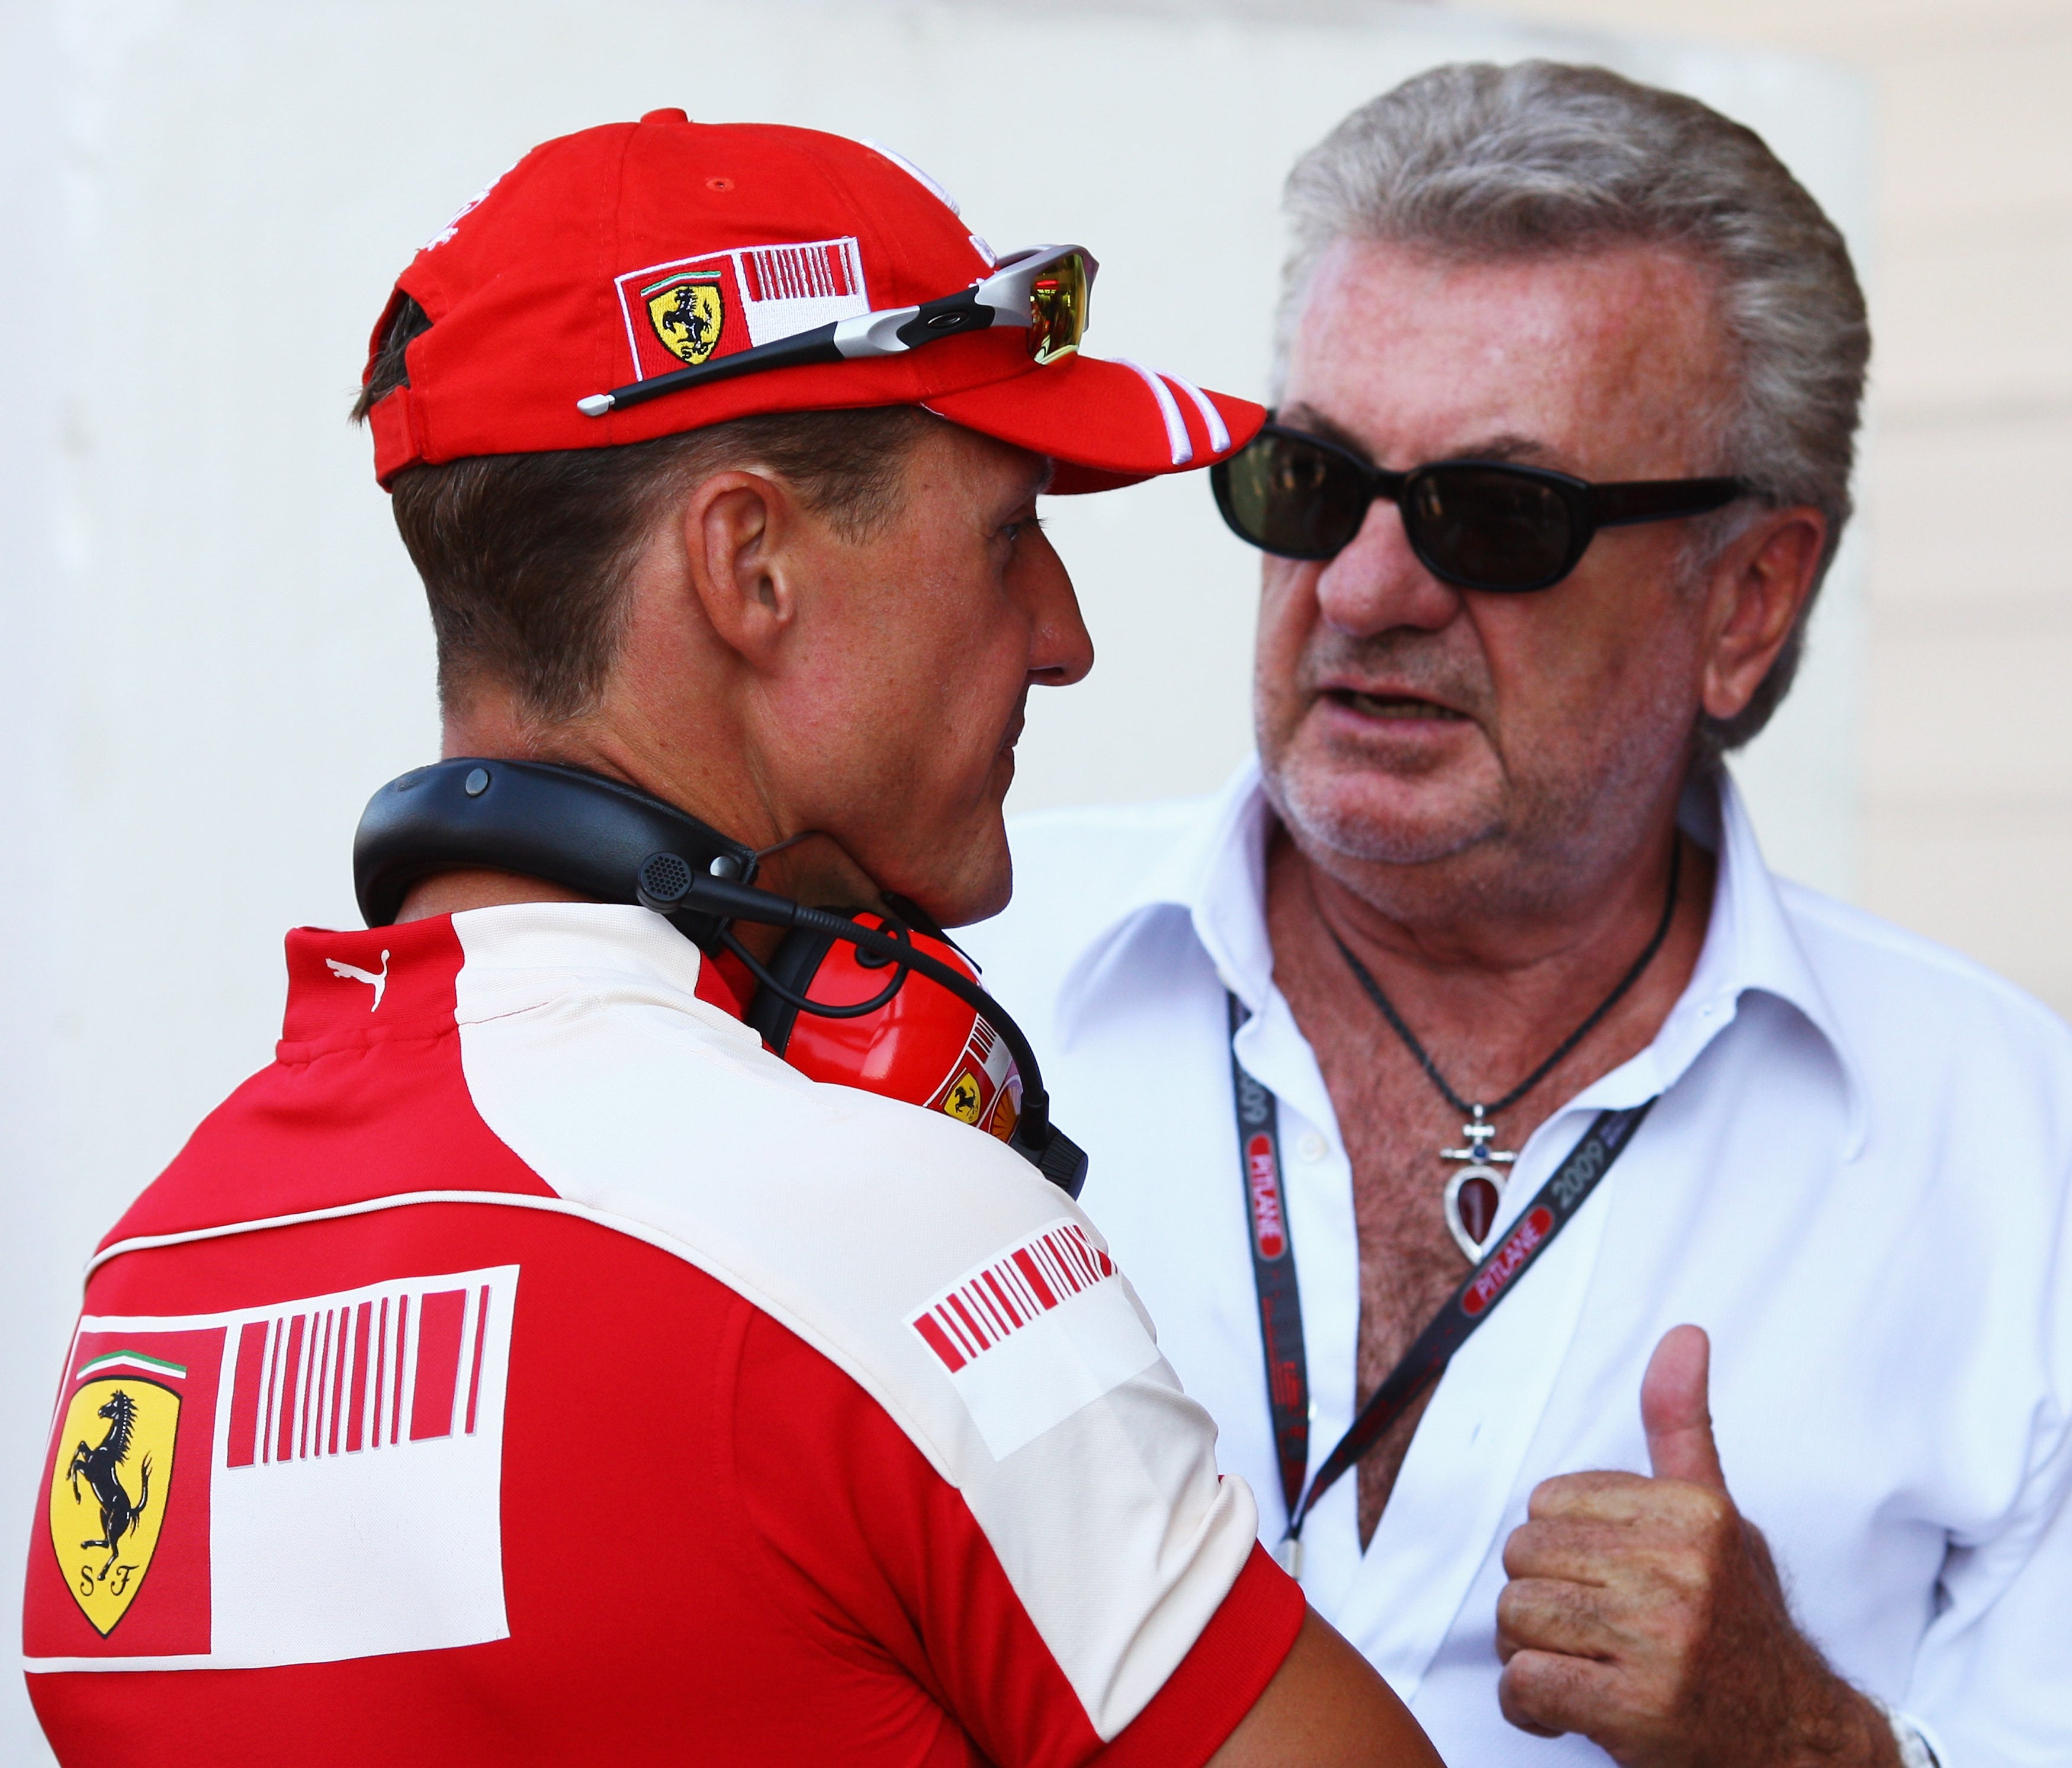 Willi Weber (right), pictured with Schumacher in 2009, has accused the German’s family of telling “lies”